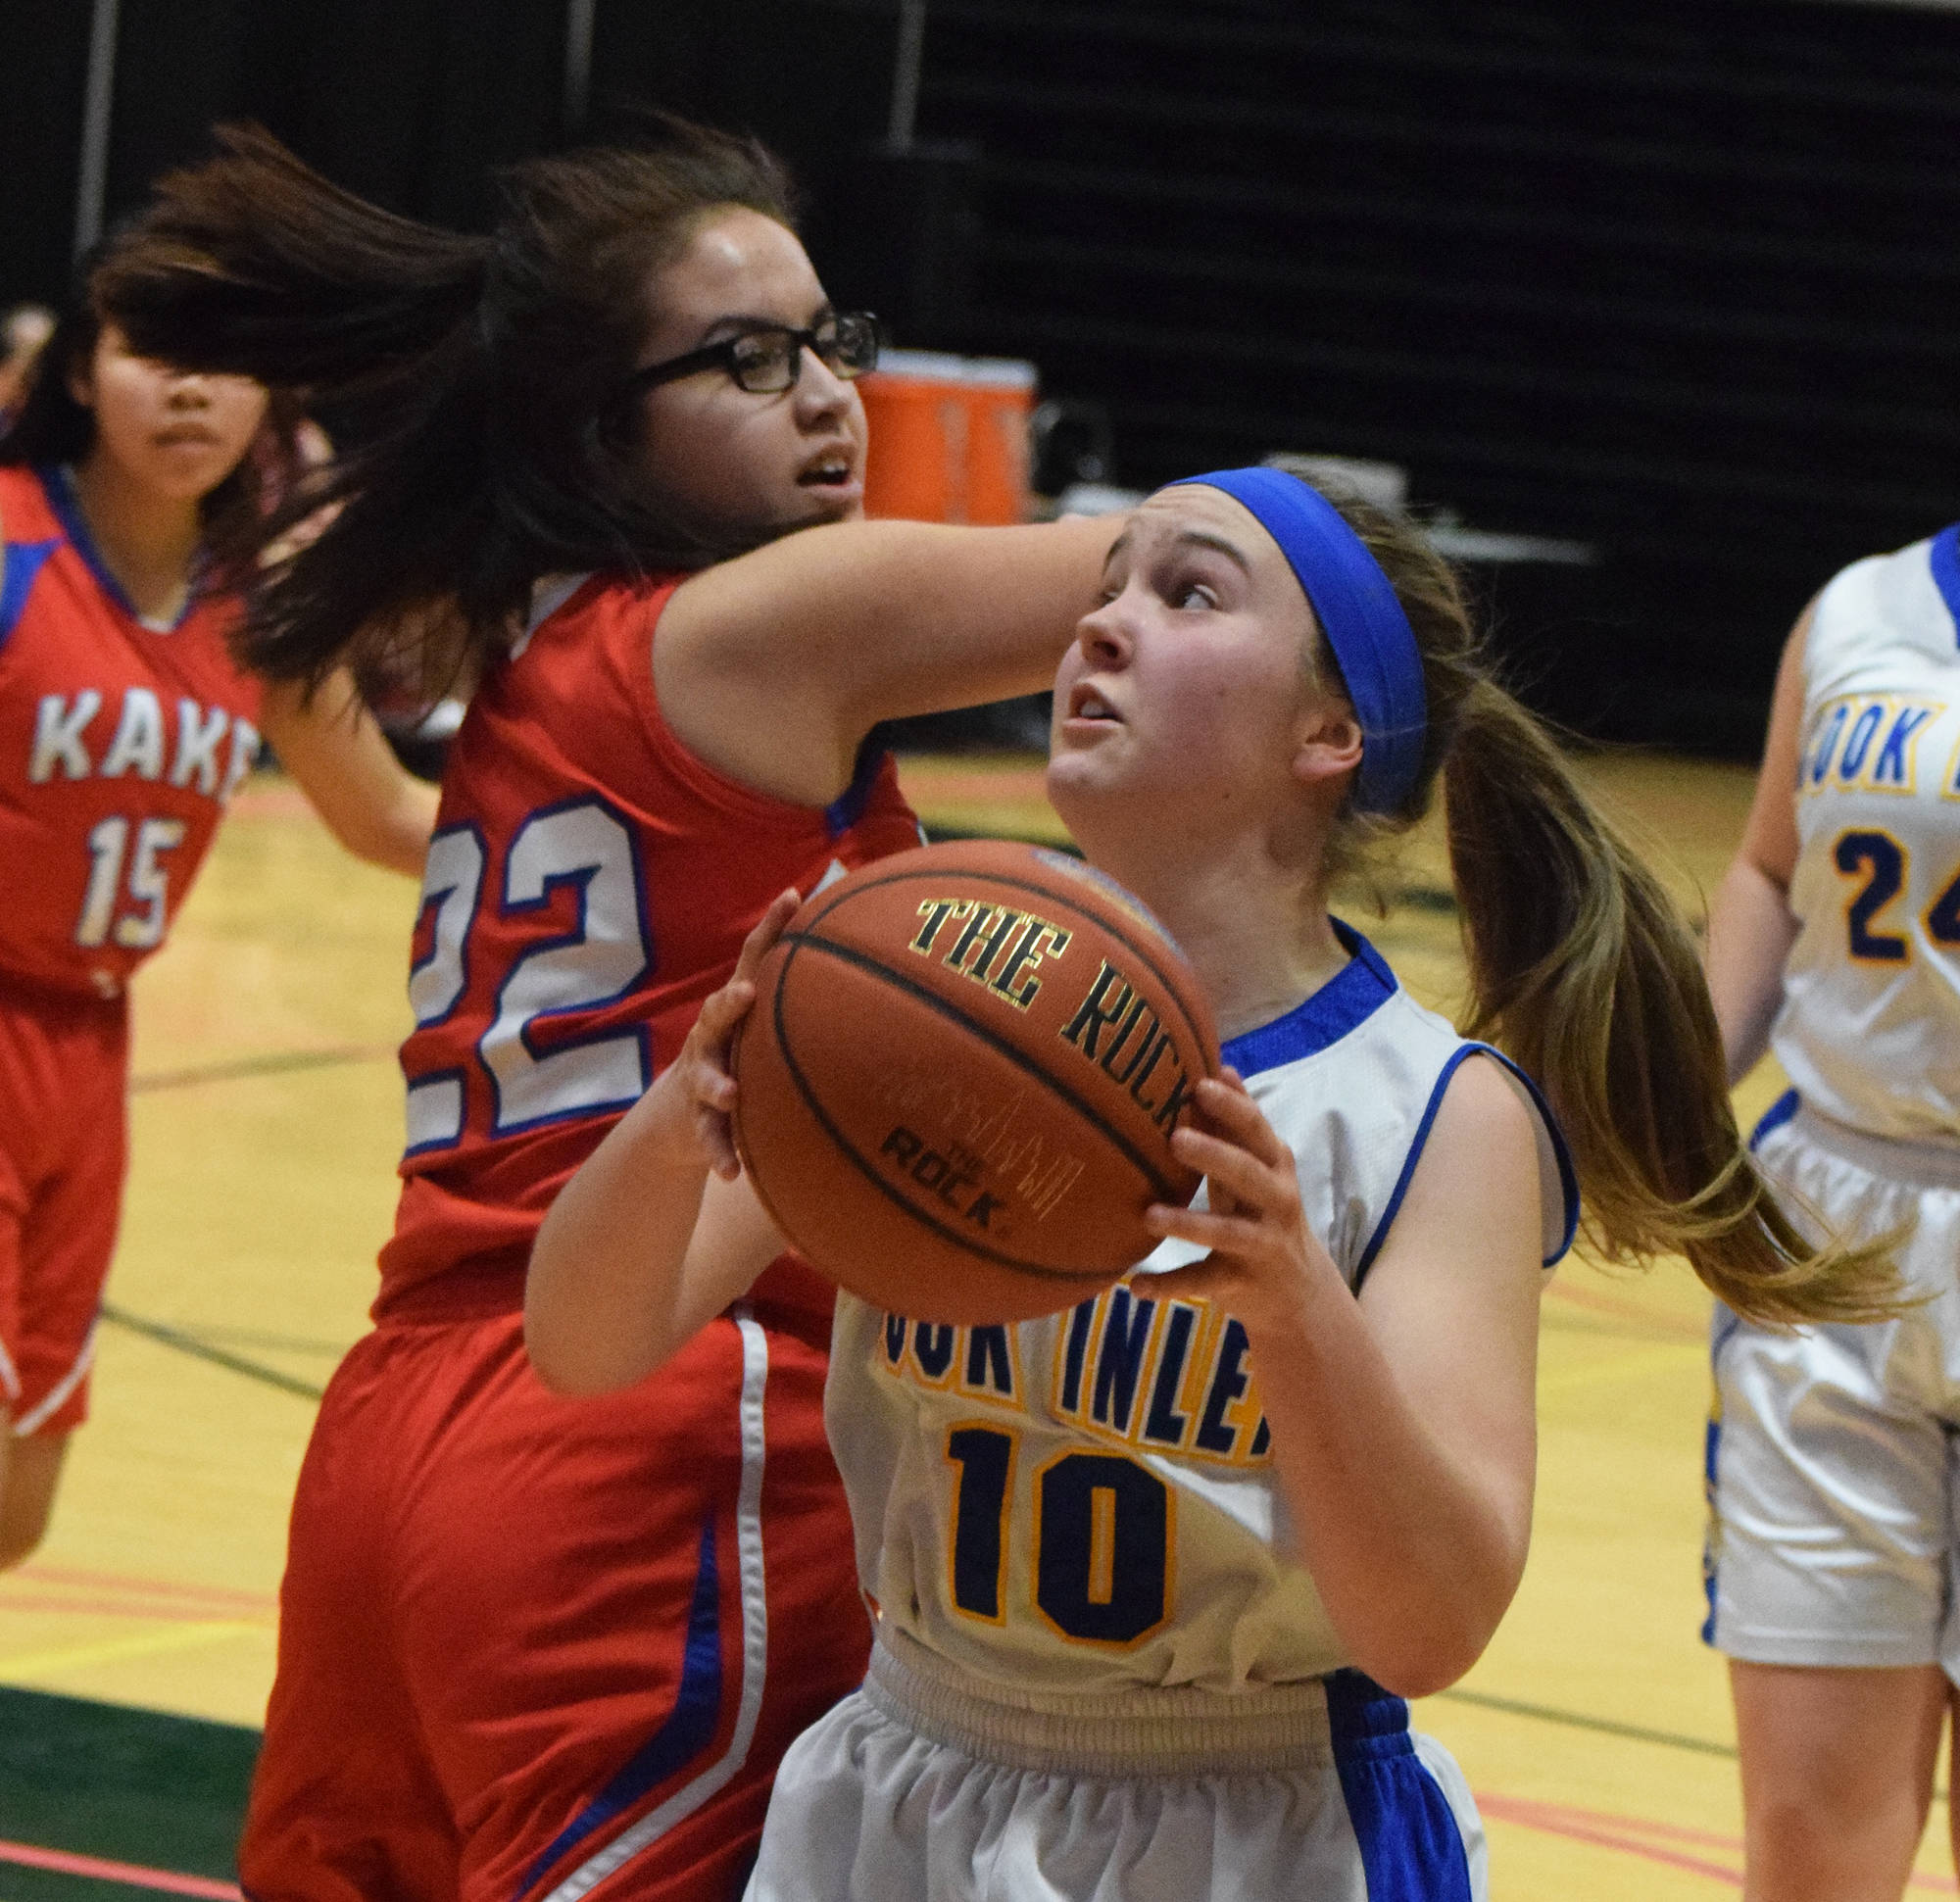 Cook Inlet Academy’s Sophia Nelson (10) drives past Kake defender Kylie Rose-Wooton for a bucket Wednesday at the Class 1A girls basketball state tournament at the Alaska Airlines Center in Anchorage. (Photo by Joey Klecka/Peninsula Clarion)